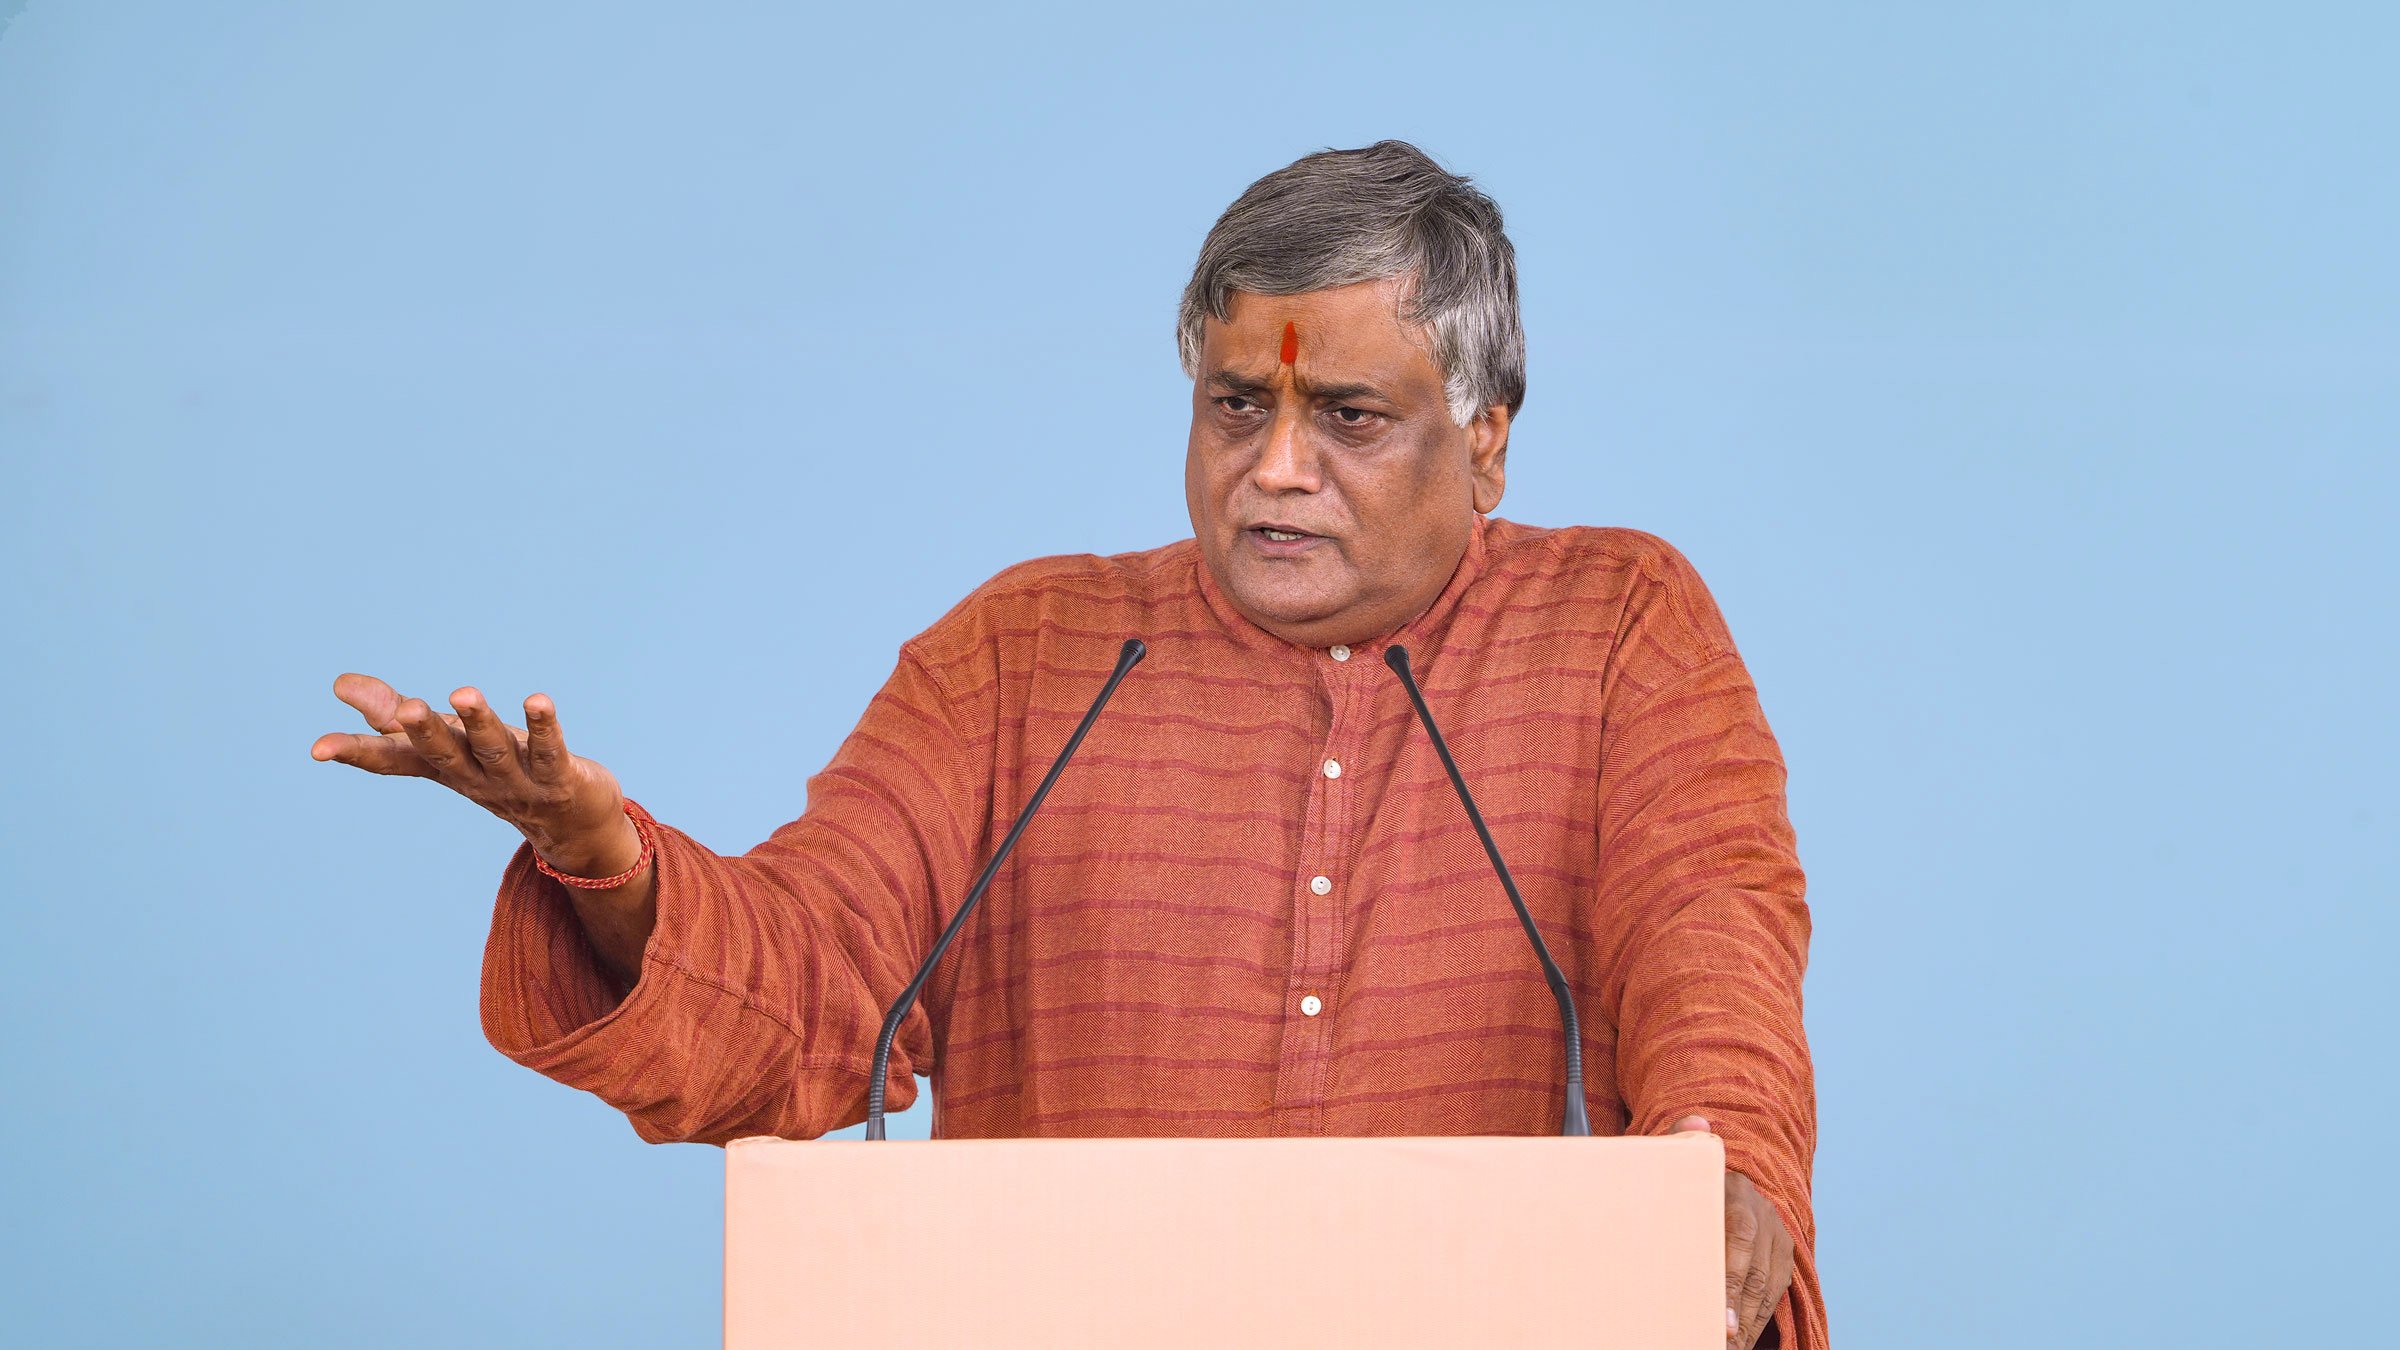 Mr Anil Dhir (Convener, Indian National Trust for Art and Cultural Heritage, Bhubaneswar, Odisha) speaking on the misplaced policies of pro-Hindu political parties and their responsibilities with regards to establishing the 'Hindu Rashtra'